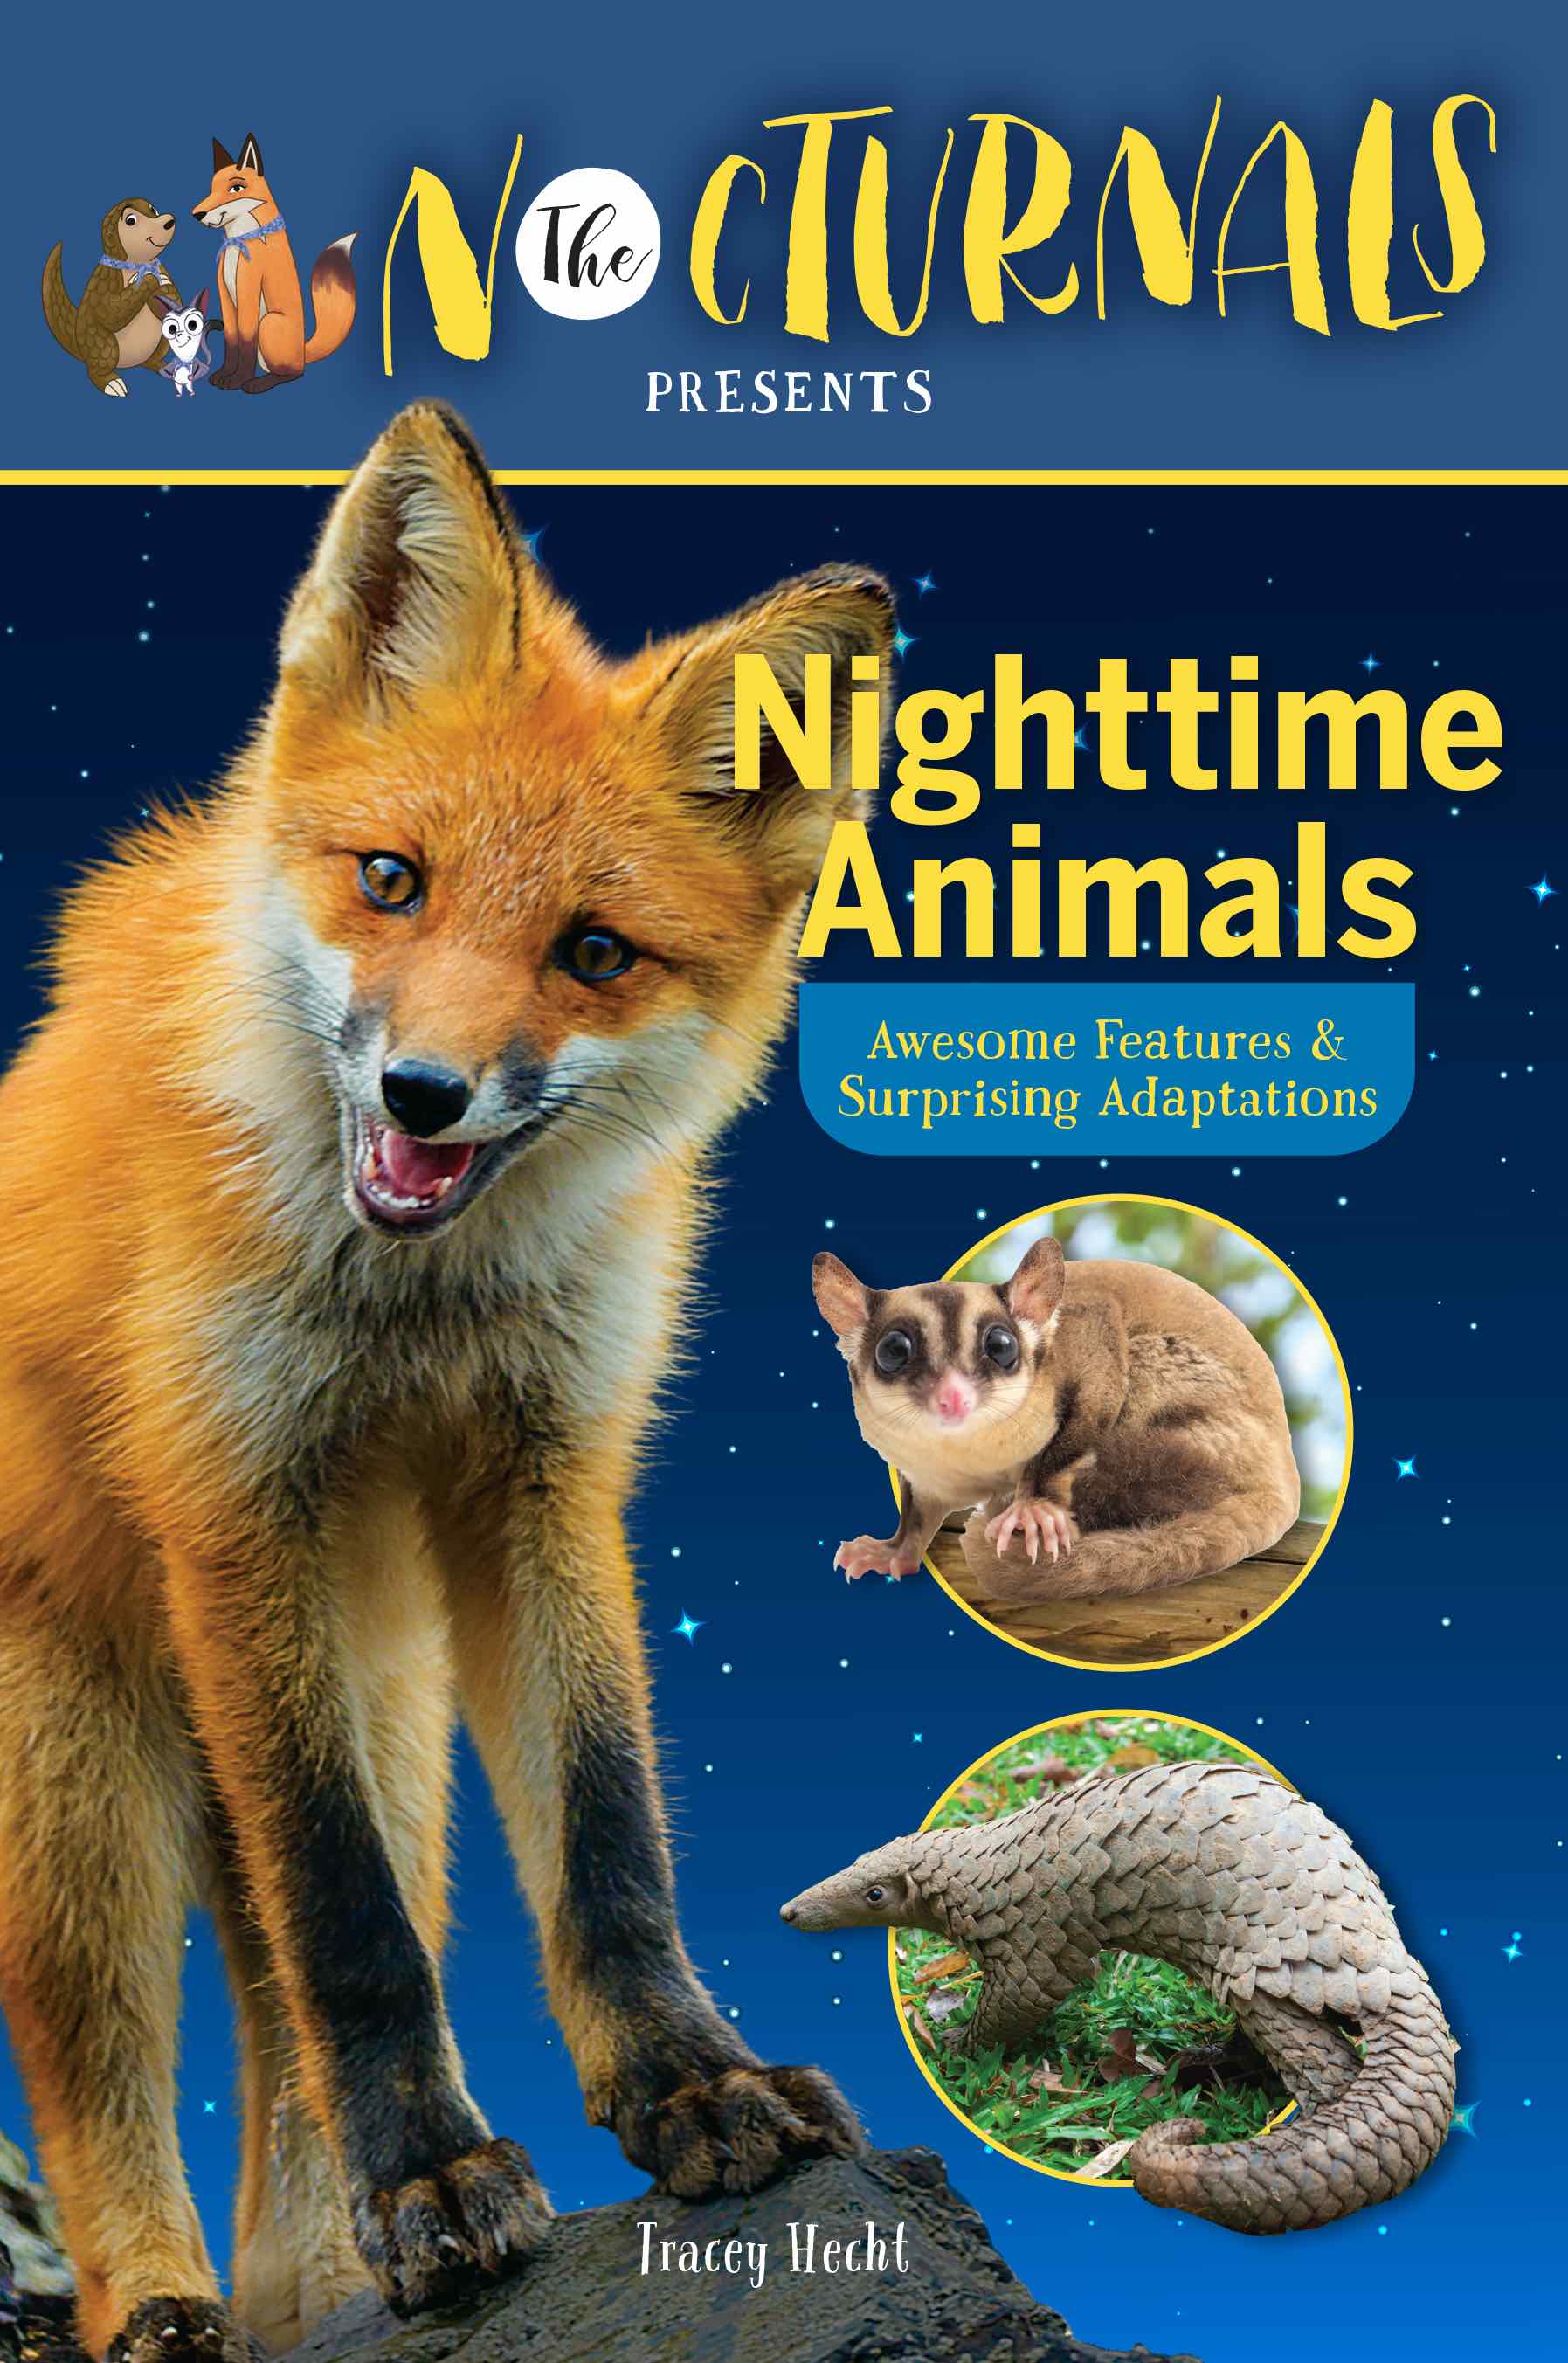 the nonfiction early reader book has a banner at the top with The Nocturnals logo next to the cartoon illustrations of the three characters. Beneath is a large photograph of a real fox on top of a rock. To the right of it are small pictures of a real sugar glider and pangolin. 